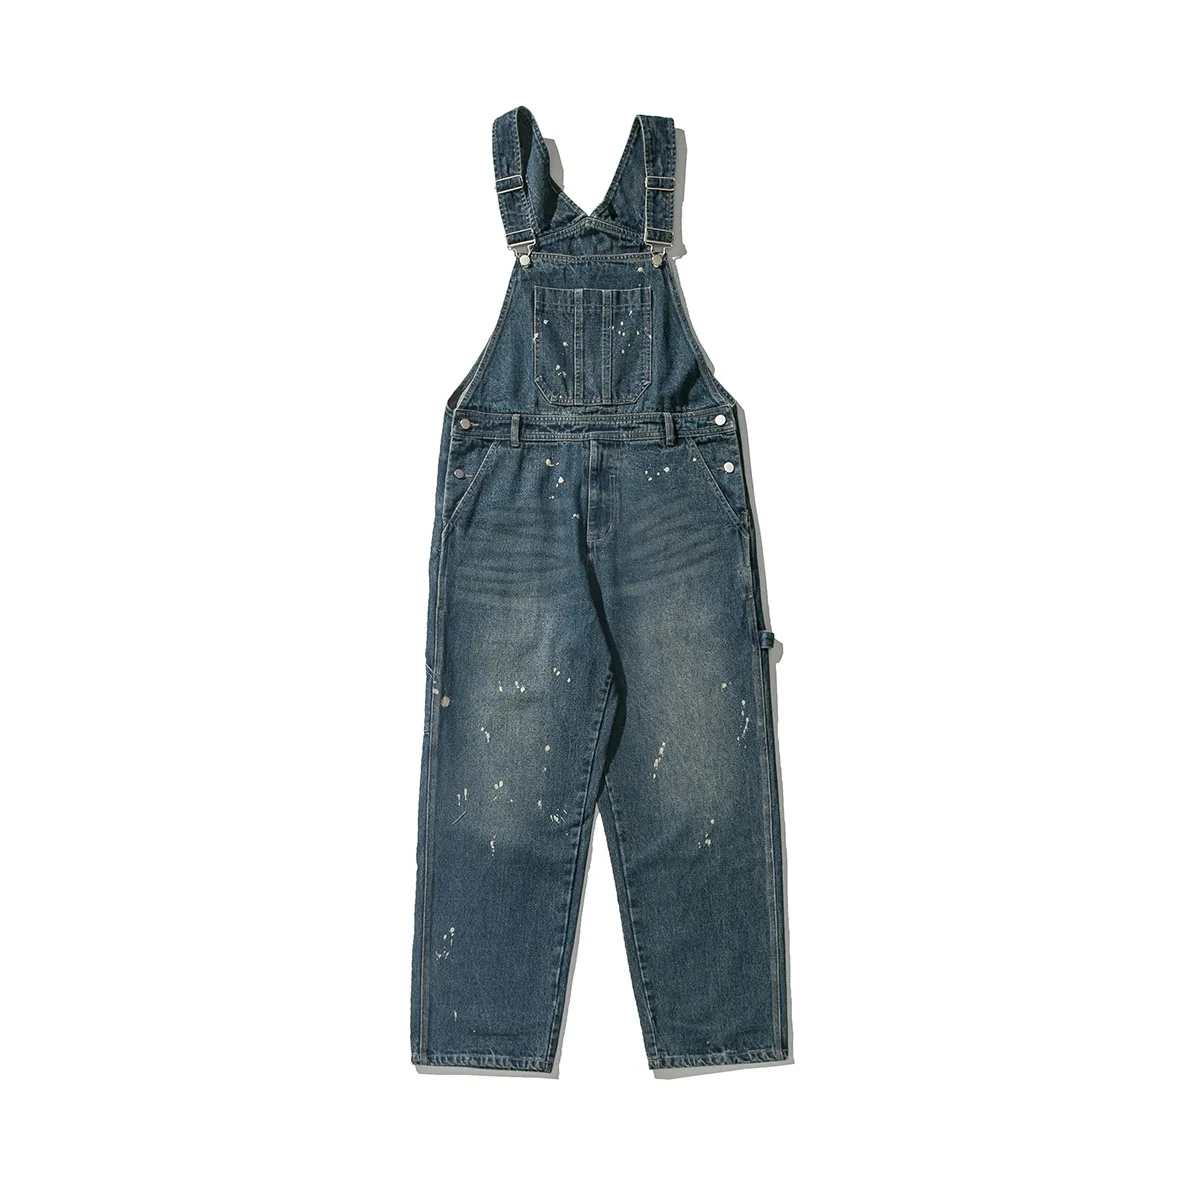 Japanese Style Autumn Spring Washed Paint Dot Strap Cargo Jeans Men Casual Baggy Denim Pants Streetwear Overalls Trousers